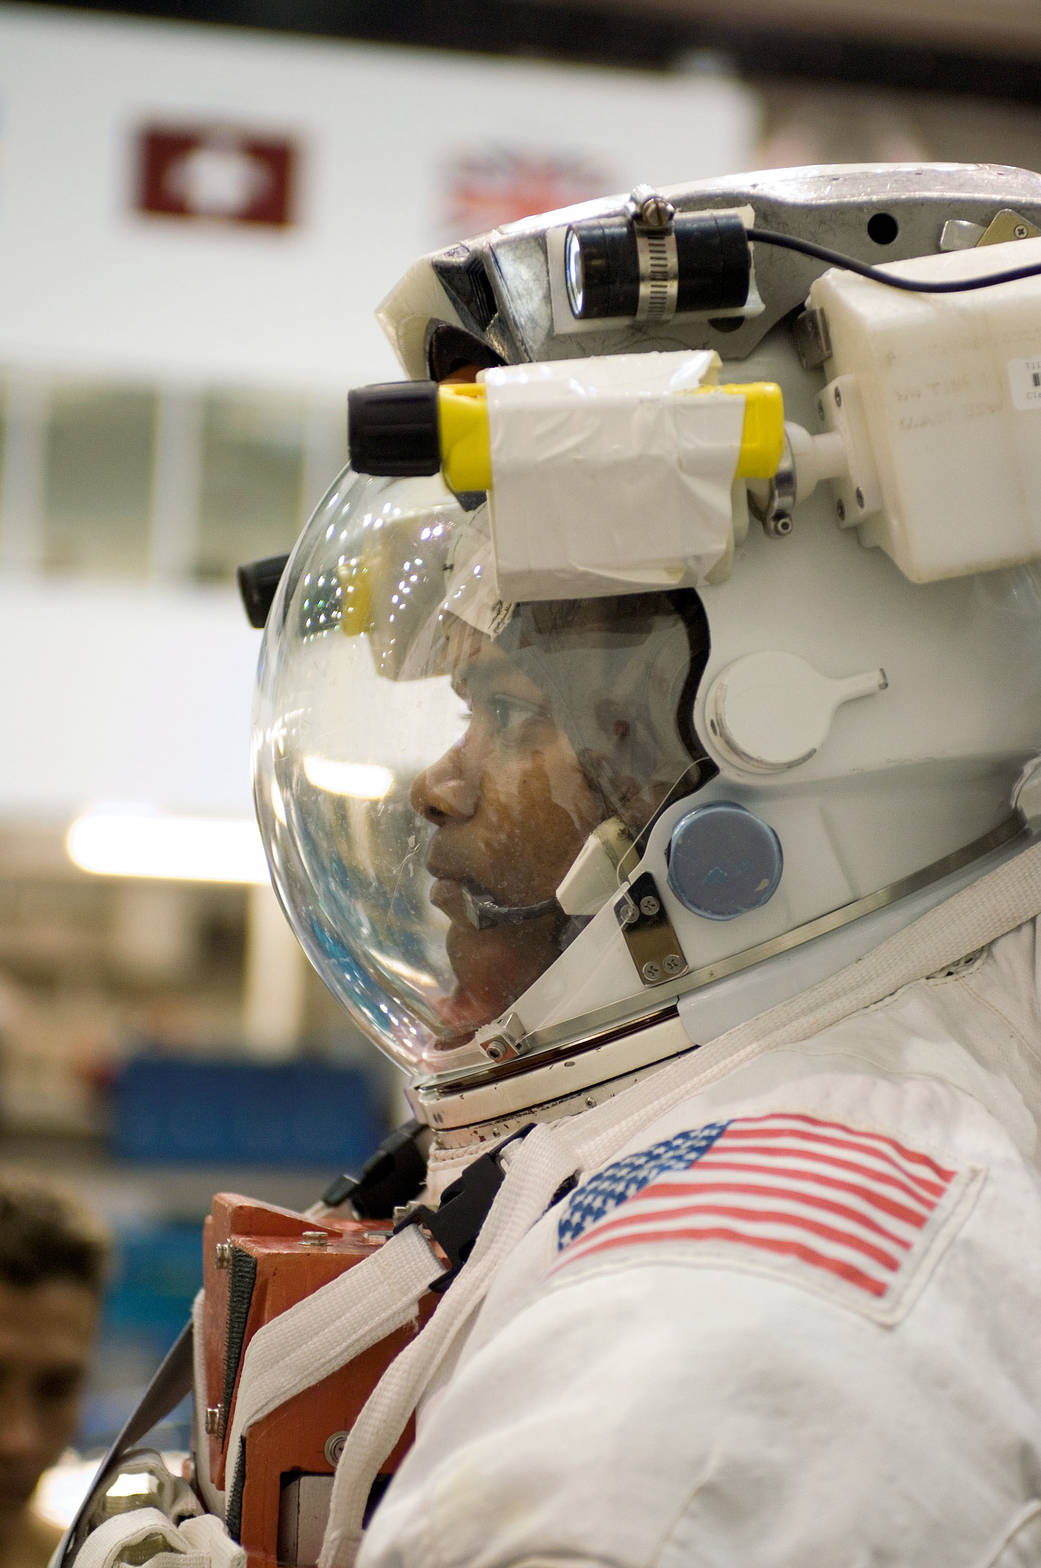 Closeup image from the side of astronaut in spacesuit with helmet